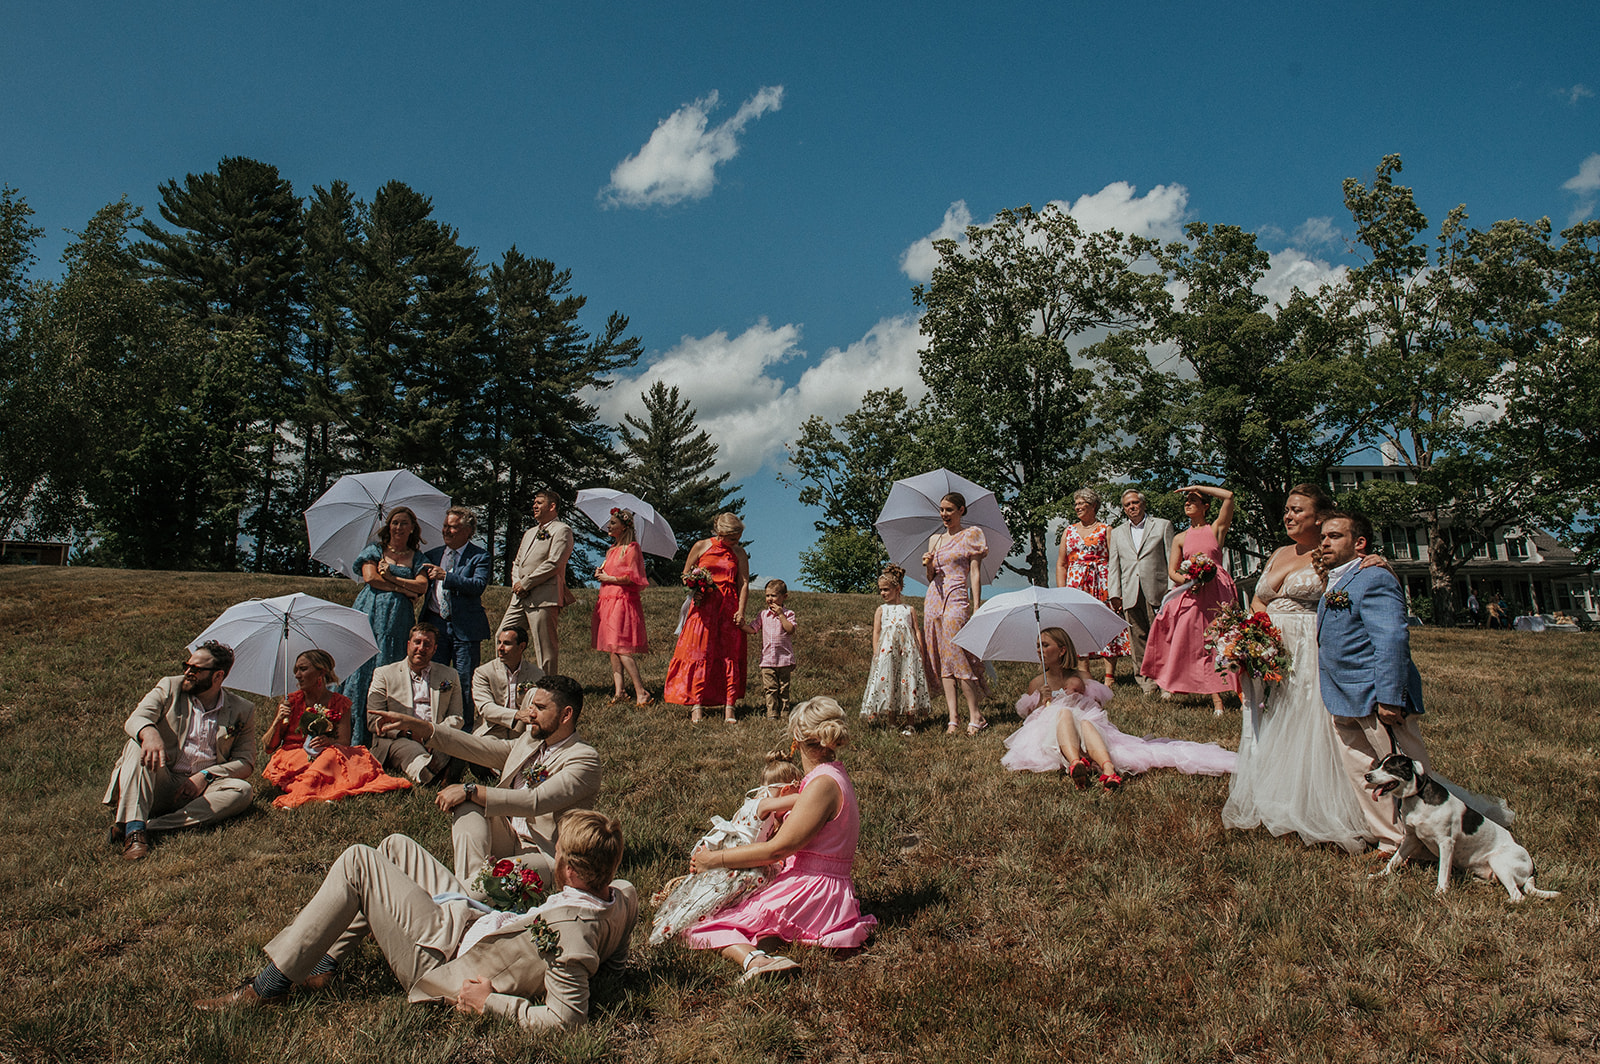 Bride and groom with wedding party and family recreate Seurat's A Sunday Afternoon on the Island of Grand Jette